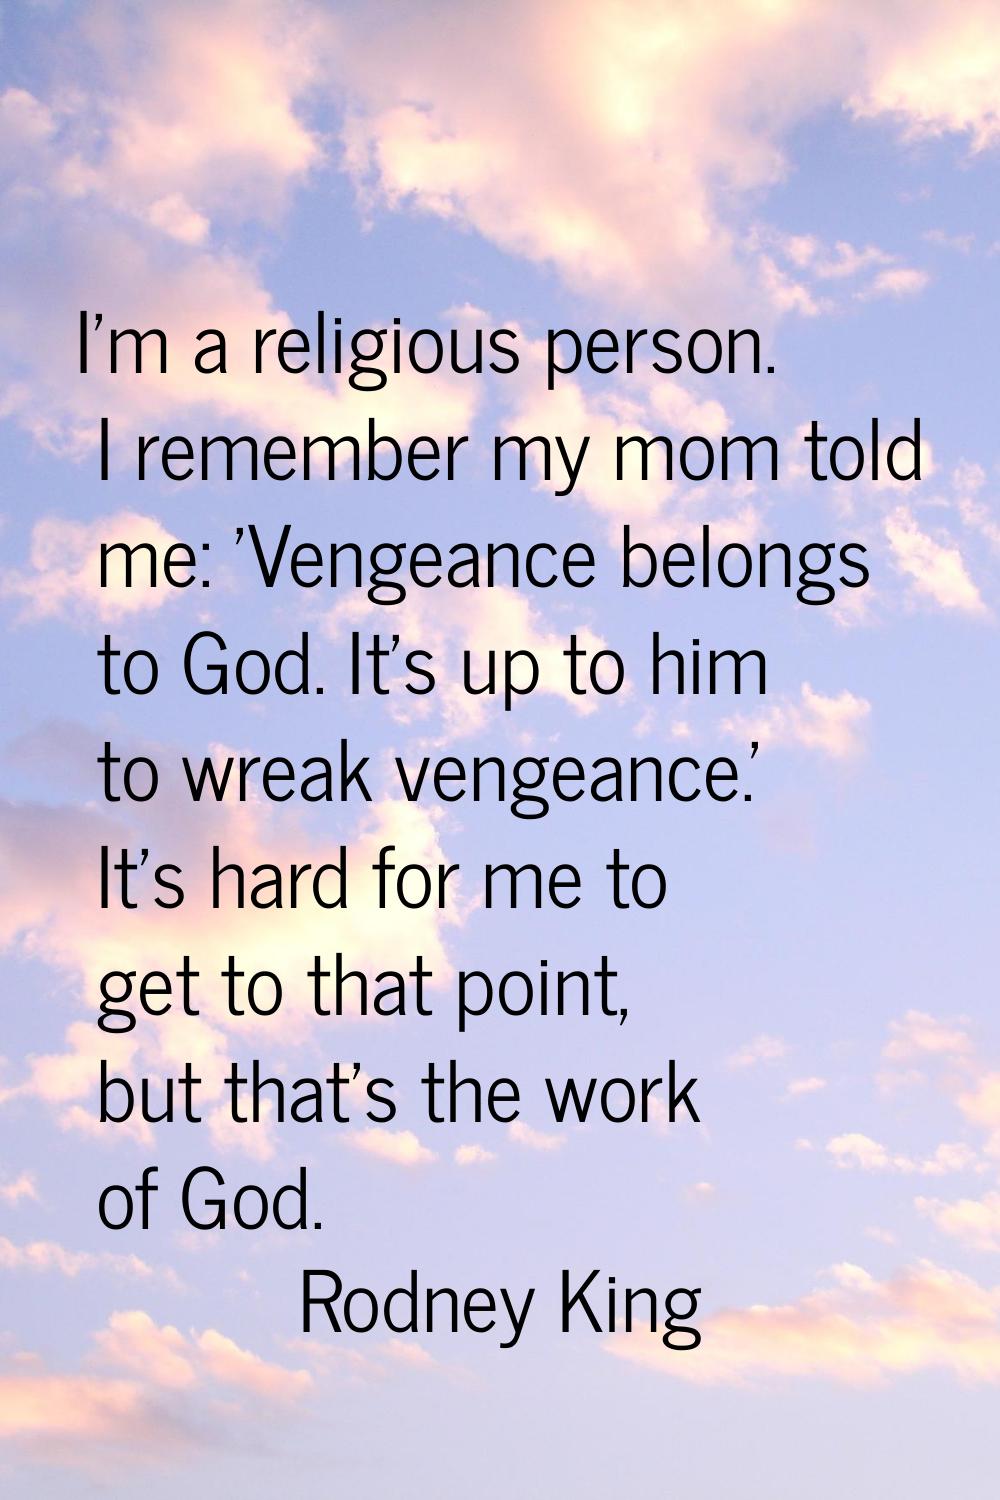 I'm a religious person. I remember my mom told me: 'Vengeance belongs to God. It's up to him to wre